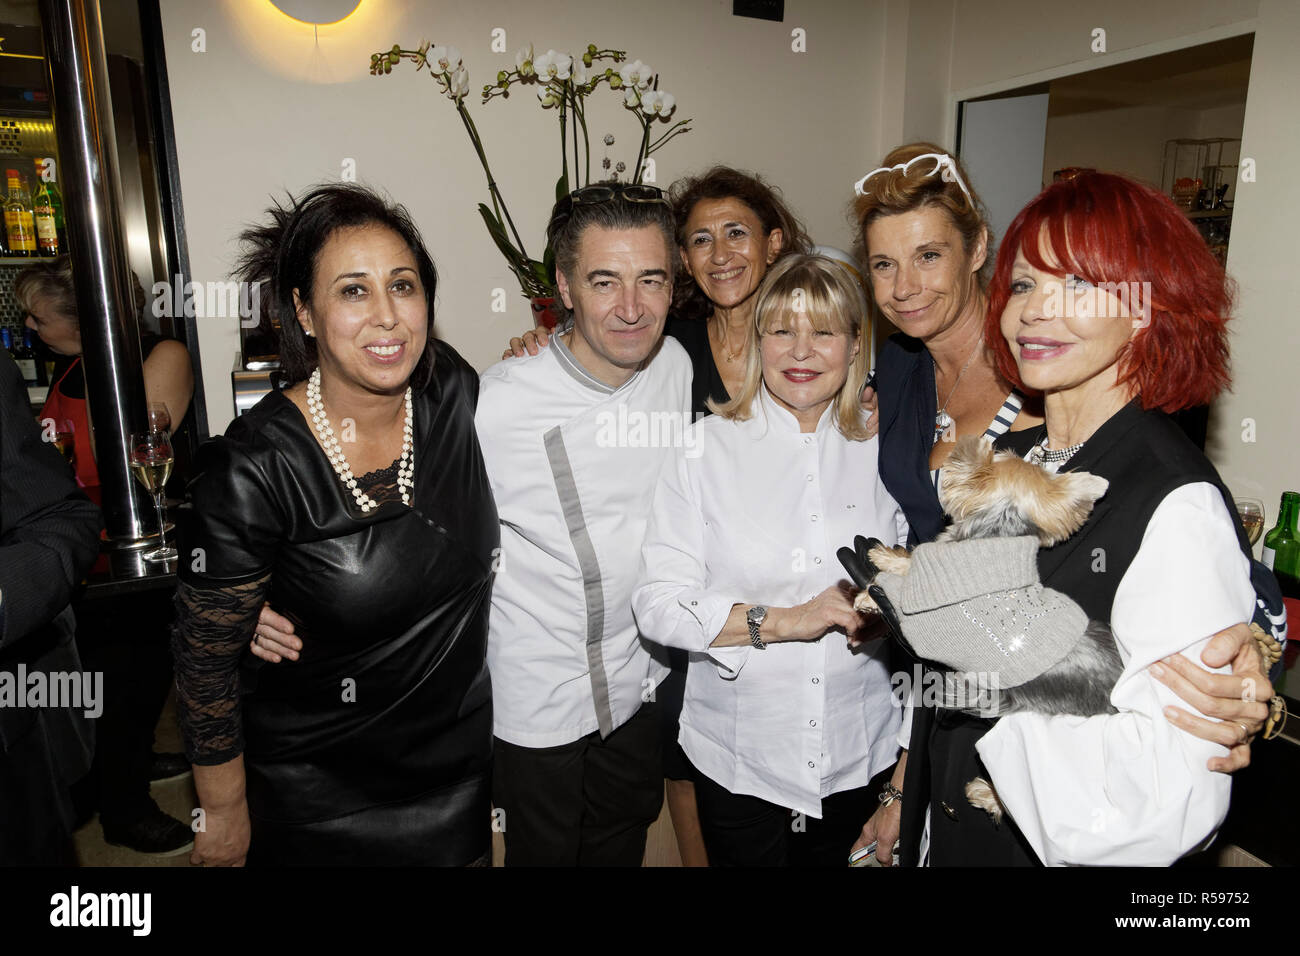 Paris, France. 29th Nov, 2018. Myriam Benjenad, Chef Jean-Pierre Jacquin,  Chef Ghislaine Arabian, Frigide Barjot and Any d'Avray - Jean-Eric Duluc,  President of the International Federation of Tourism awarded the 2018  Lauriers